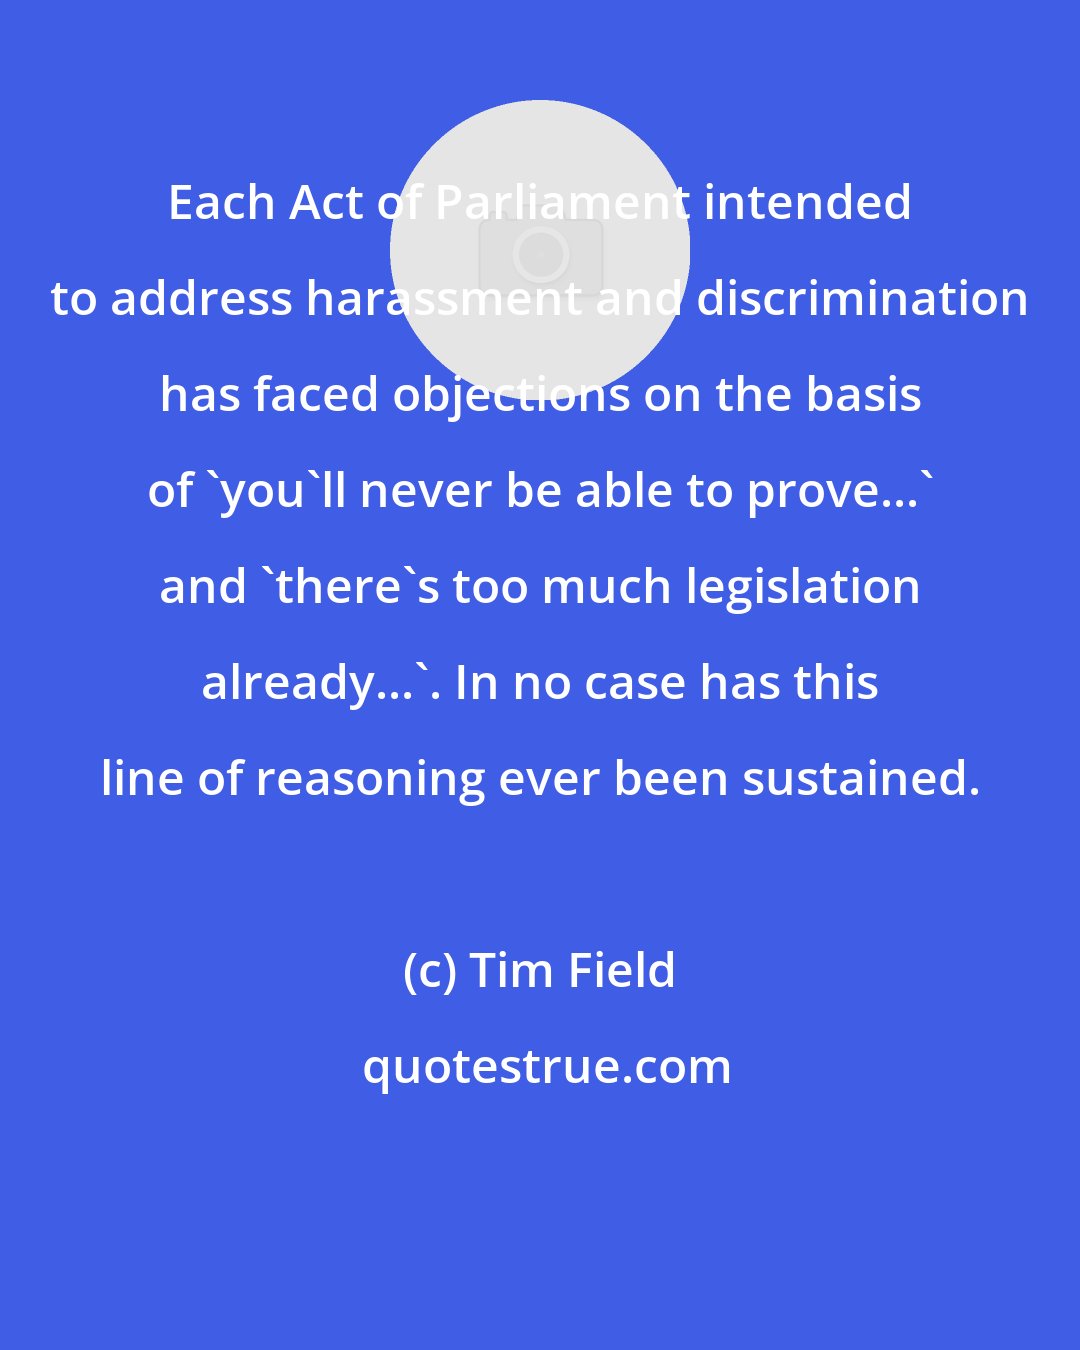 Tim Field: Each Act of Parliament intended to address harassment and discrimination has faced objections on the basis of 'you'll never be able to prove...' and 'there's too much legislation already...'. In no case has this line of reasoning ever been sustained.